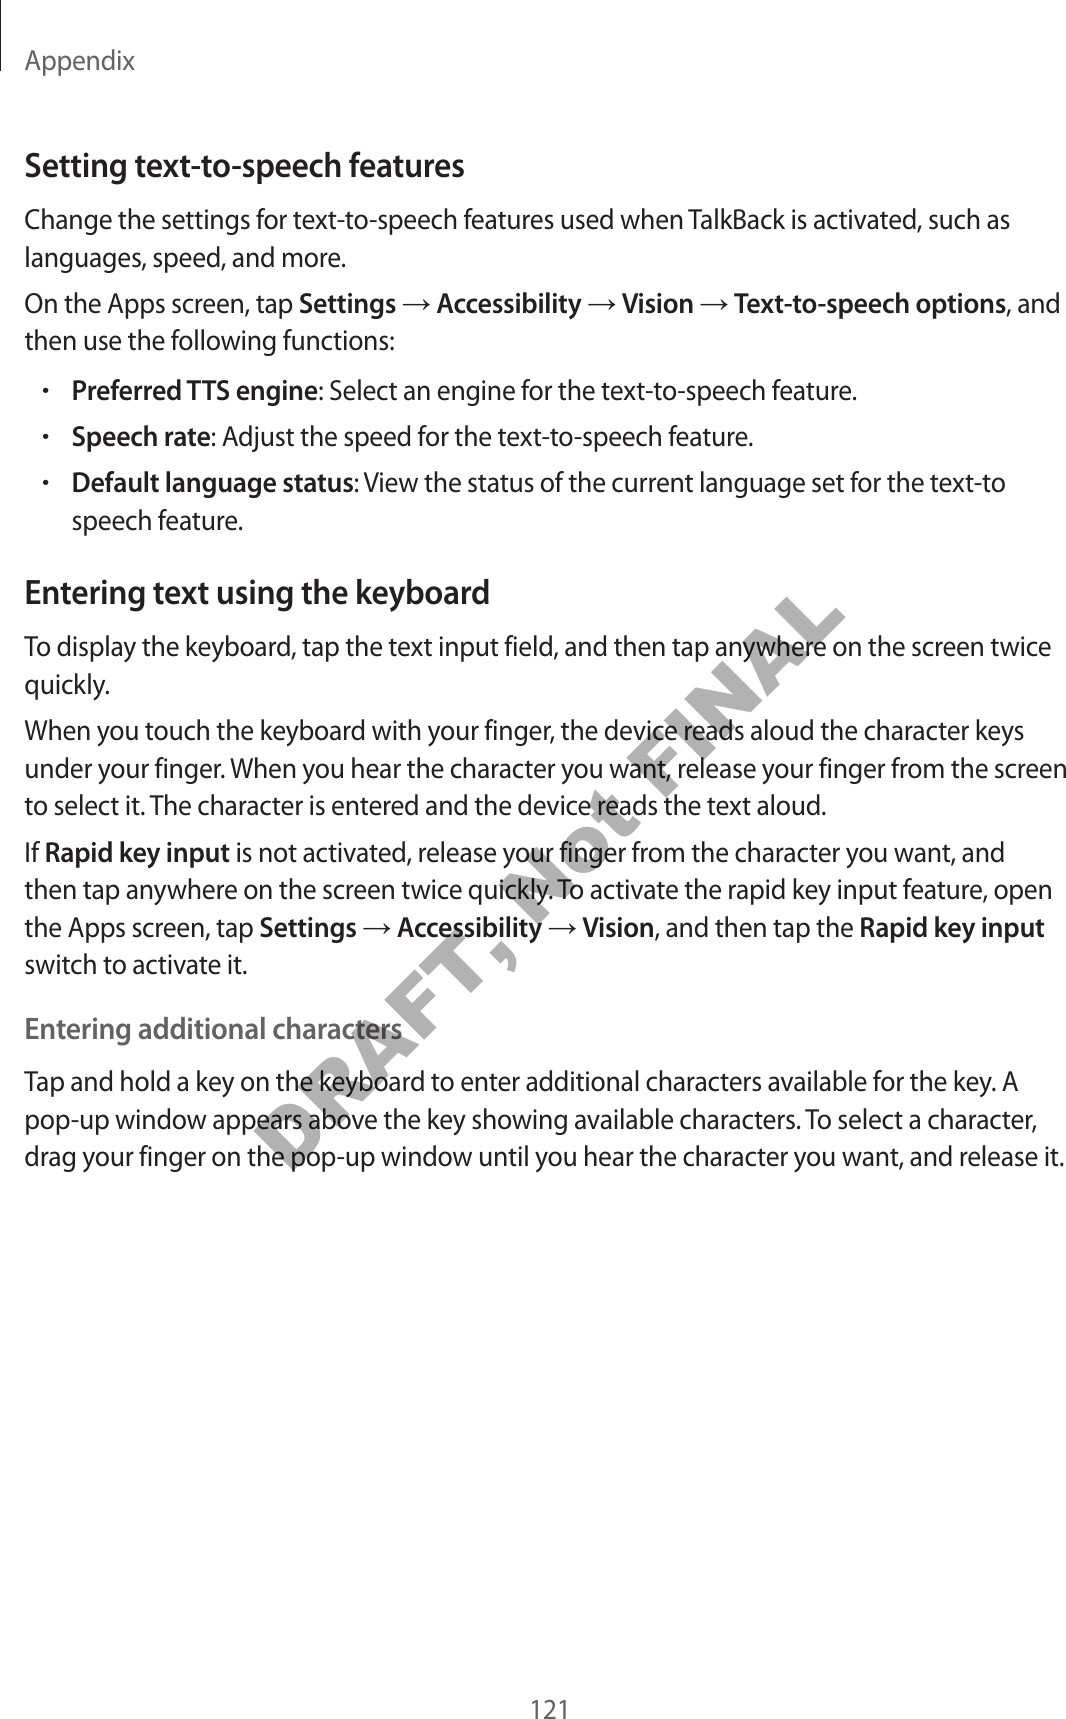 Appendix121Setting text-to-speech featur esChange the settings for t ext-to-speech featur es used when TalkBack is activated , such as languages, speed , and mor e .On the Apps screen, tap Settings  Accessibility  Vision  Text-to-speech options, and then use the follo wing functions:•Preferred TTS engine: Select an engine f or the t ext-to-speech featur e .•Speech rat e: Adjust the speed f or the t ext-to-speech featur e .•Default language status: View the status of the curr ent language set for the text-to speech featur e.Entering t e xt using the keyboardTo display the keyboar d , tap the text input field, and then tap an ywhere on the scr een twice quickly.When you t ouch the keyboar d with y our finger, the device reads aloud the character keys under your finger. When you hear the character you wan t, r elease y our finger fr om the scr een to select it. The character is enter ed and the devic e r eads the te xt aloud.If Rapid key input is not activated, r elease y our finger fr om the character y ou want , and then tap anywhere on the scr een twice quickly. To activat e the rapid key input f ea tur e , open the Apps screen, tap Settings  Accessibility  Vision, and then tap the Rapid key input switch to activate it.Entering additional char actersTap and hold a key on the keyboard to ent er additional characters av ailable f or the key. A pop-up window appears above the key showing a v ailable characters. To select a character, drag your finger on the pop-up window until y ou hear the character y ou want , and r elease it.DRAFT, Not FINAL